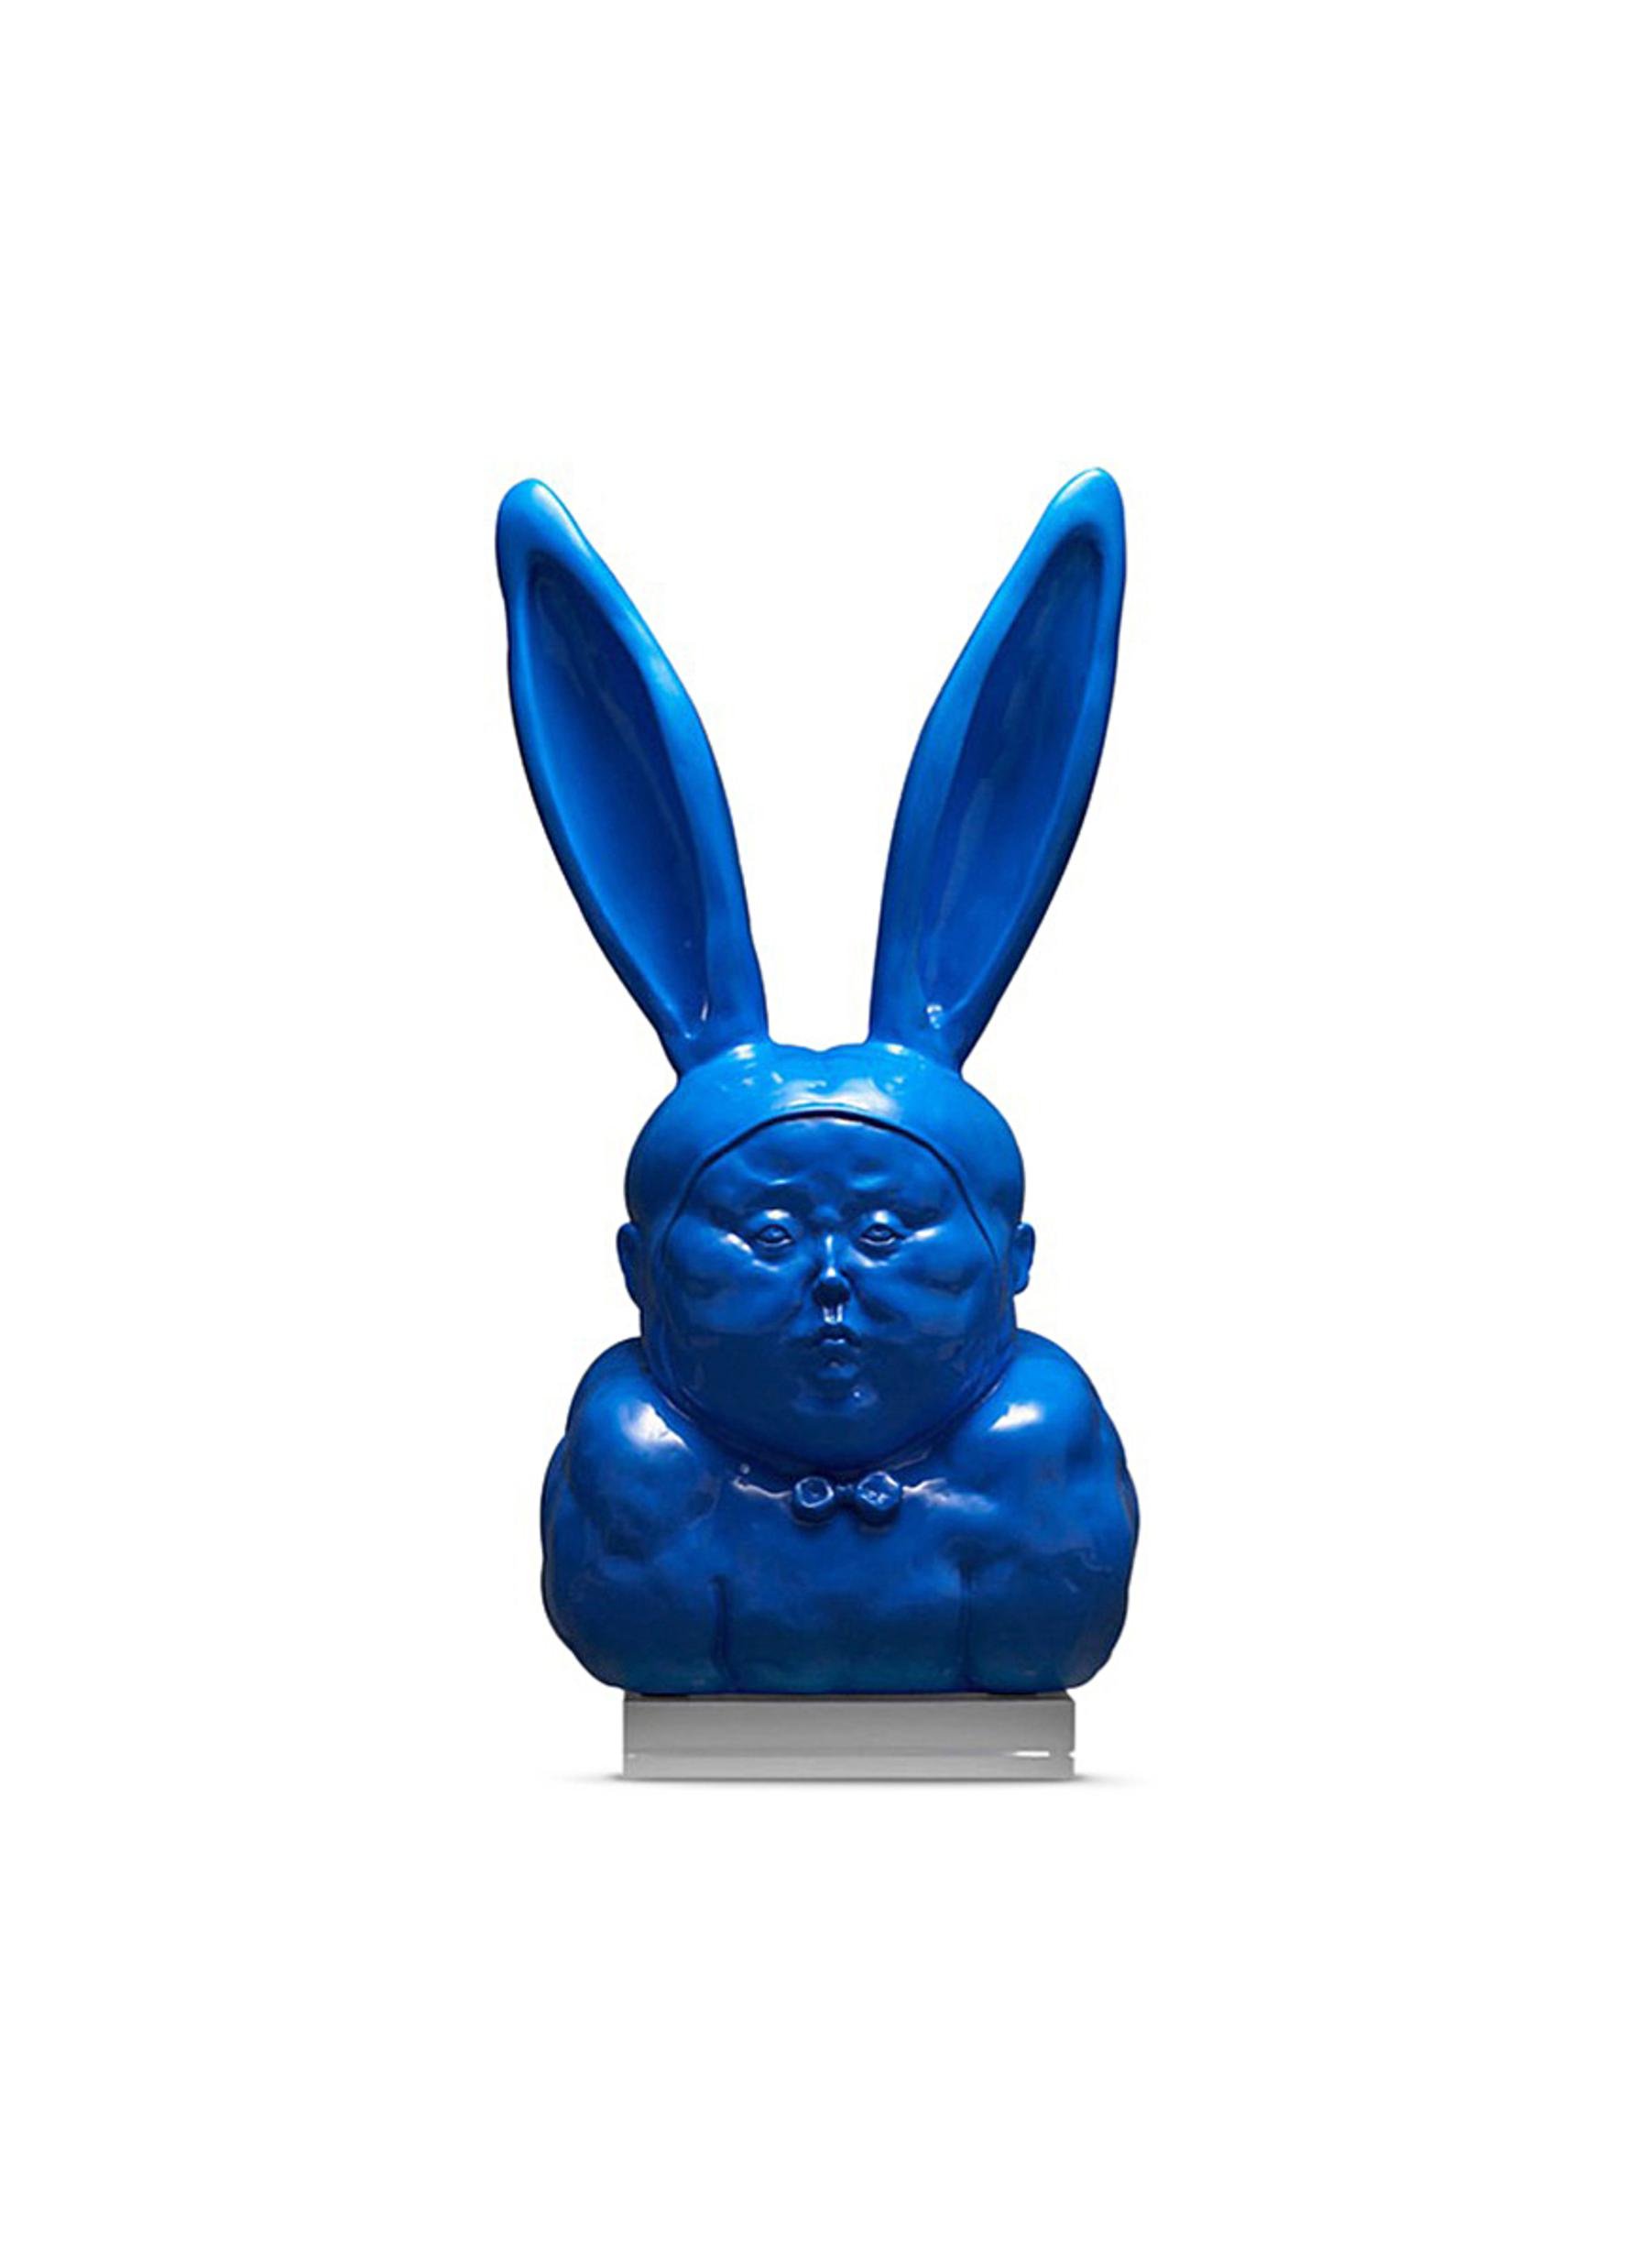 The Bunny Guy I sculpture